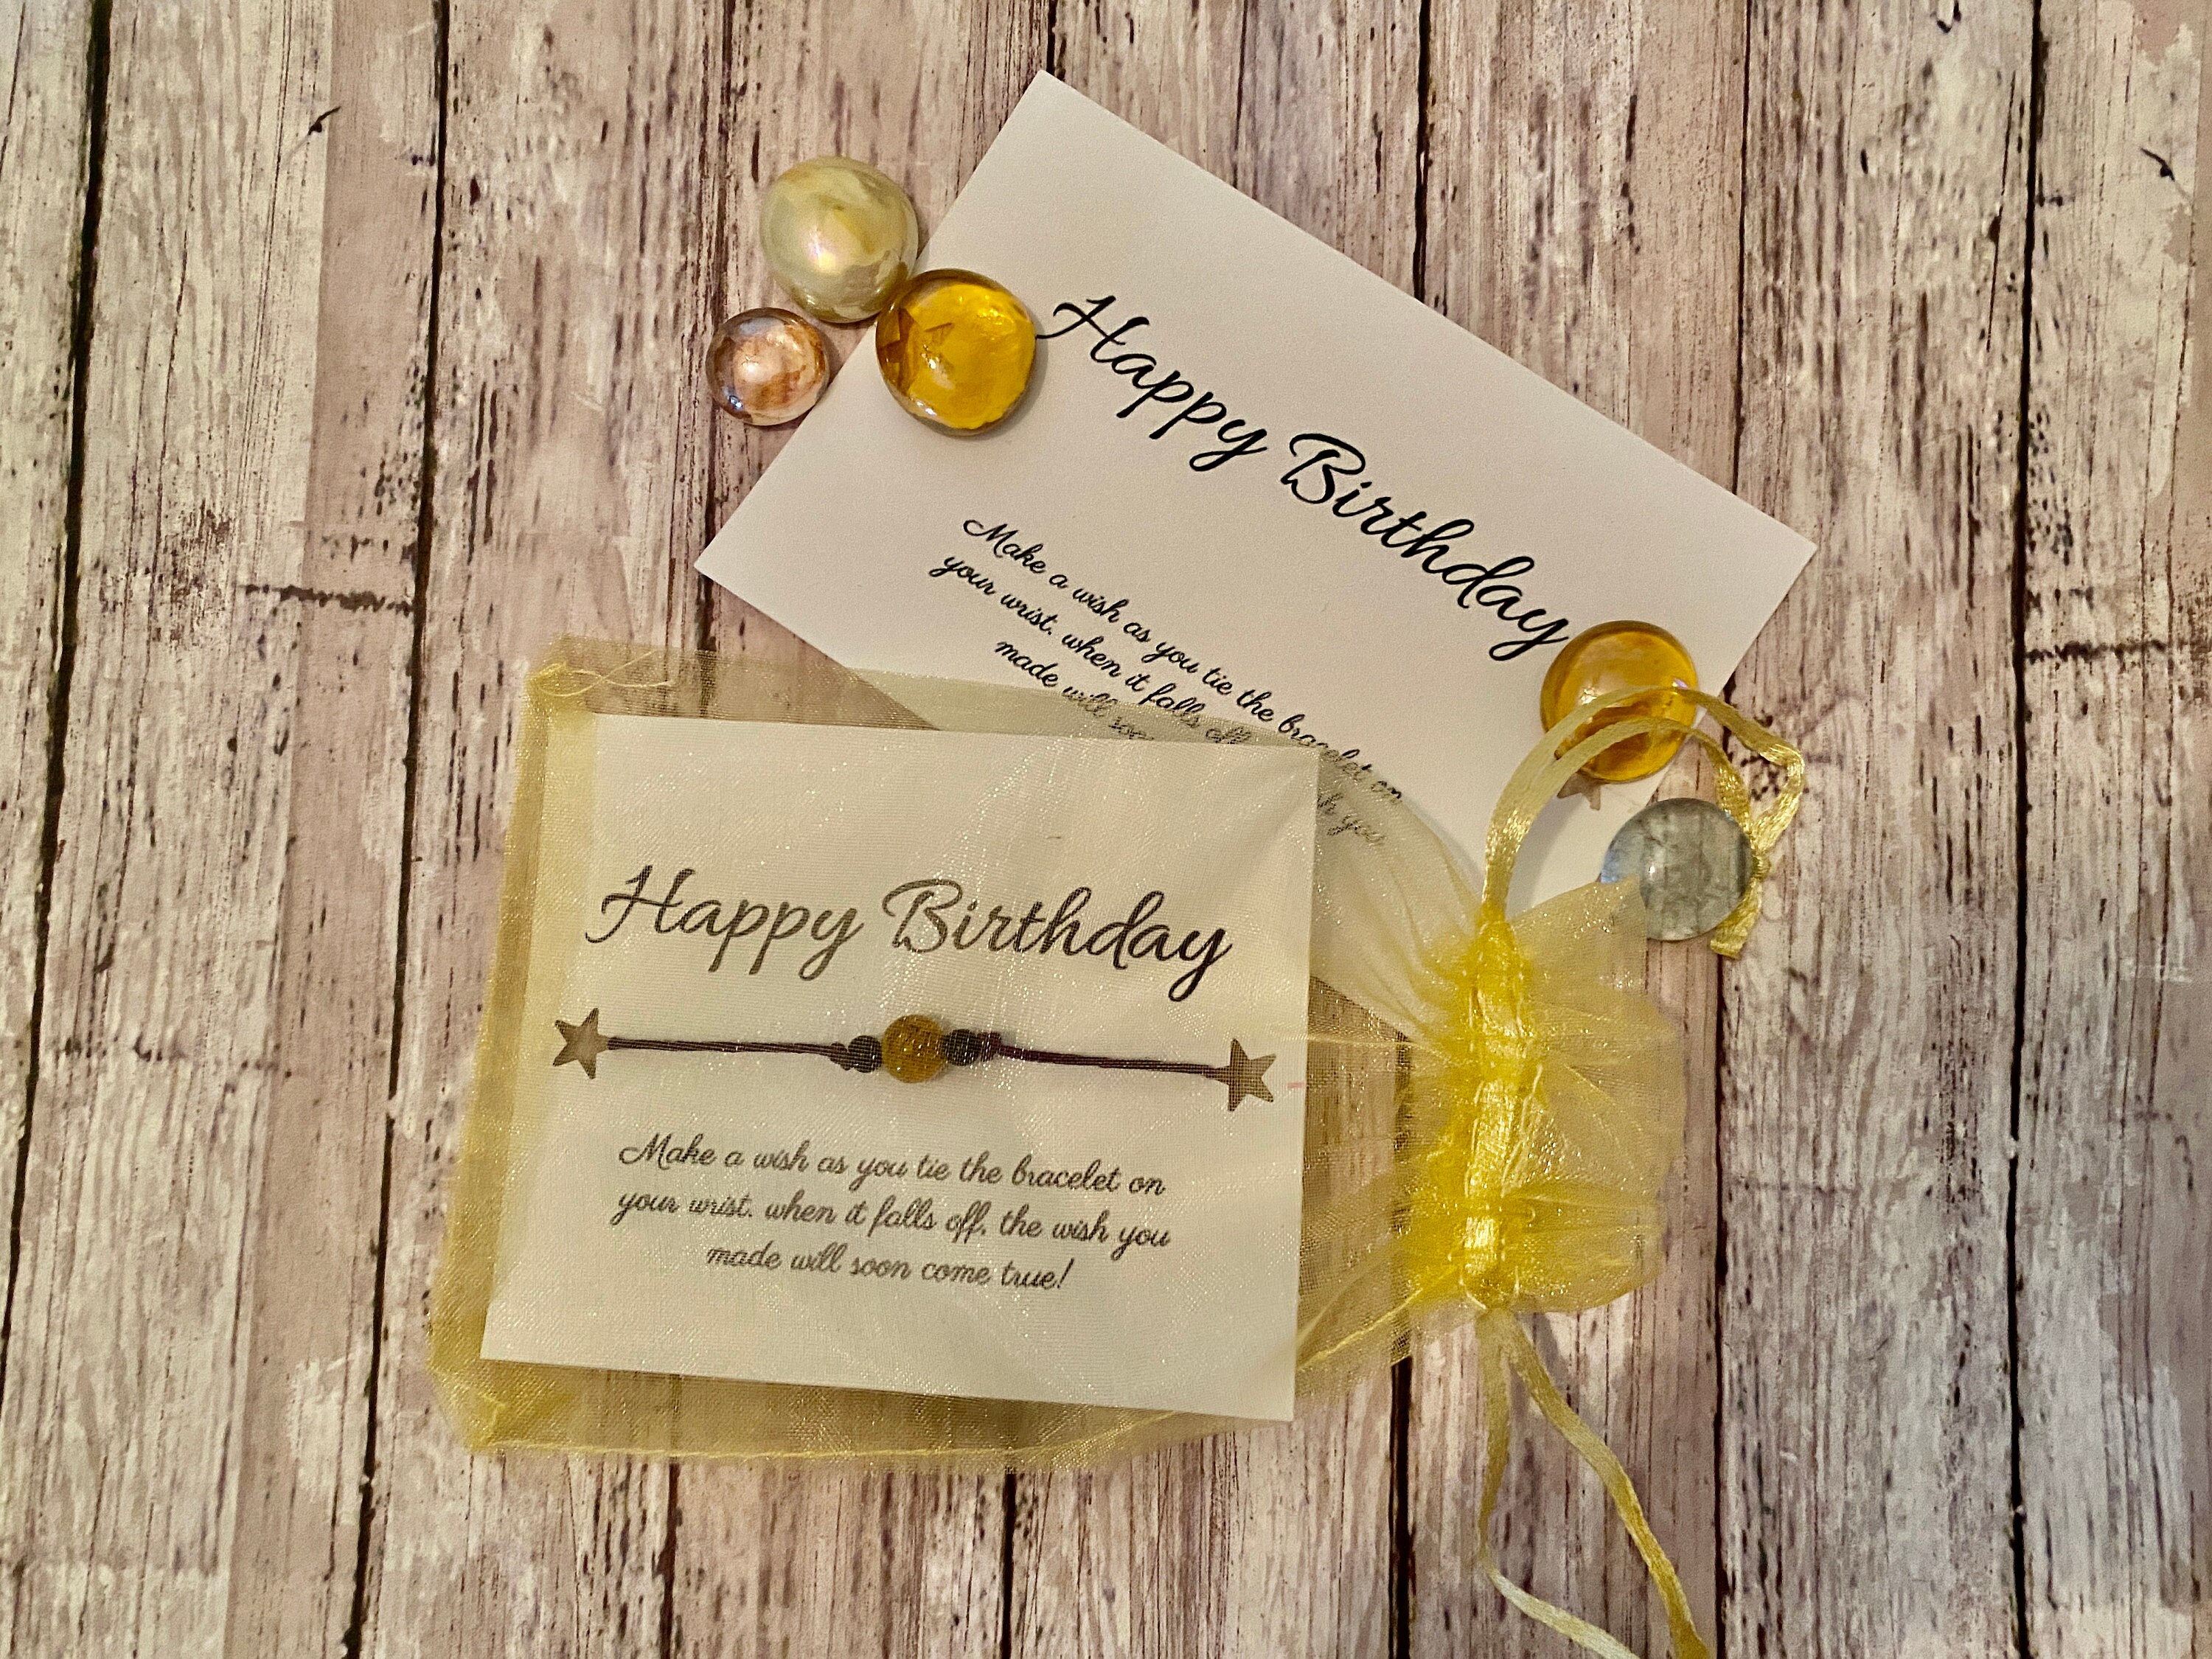 Happy Birthday Sorry I Can't Bee There Family Friendship Wish Bracelet Gift 